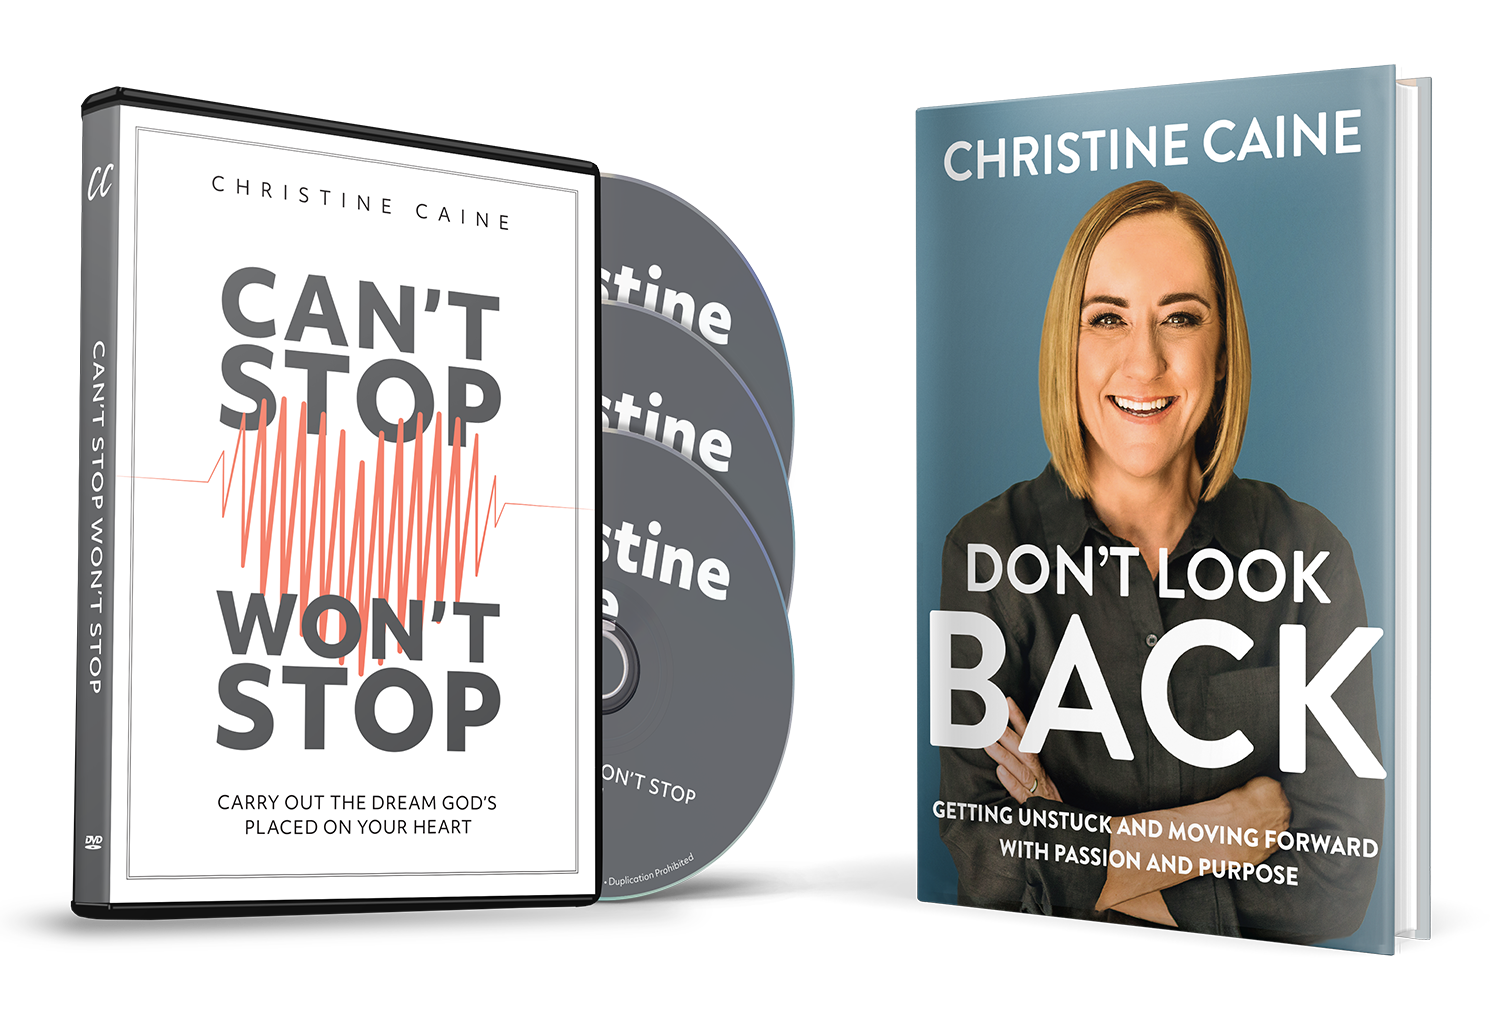 Can't Stop Won't Stop by Christine Caine from TBN